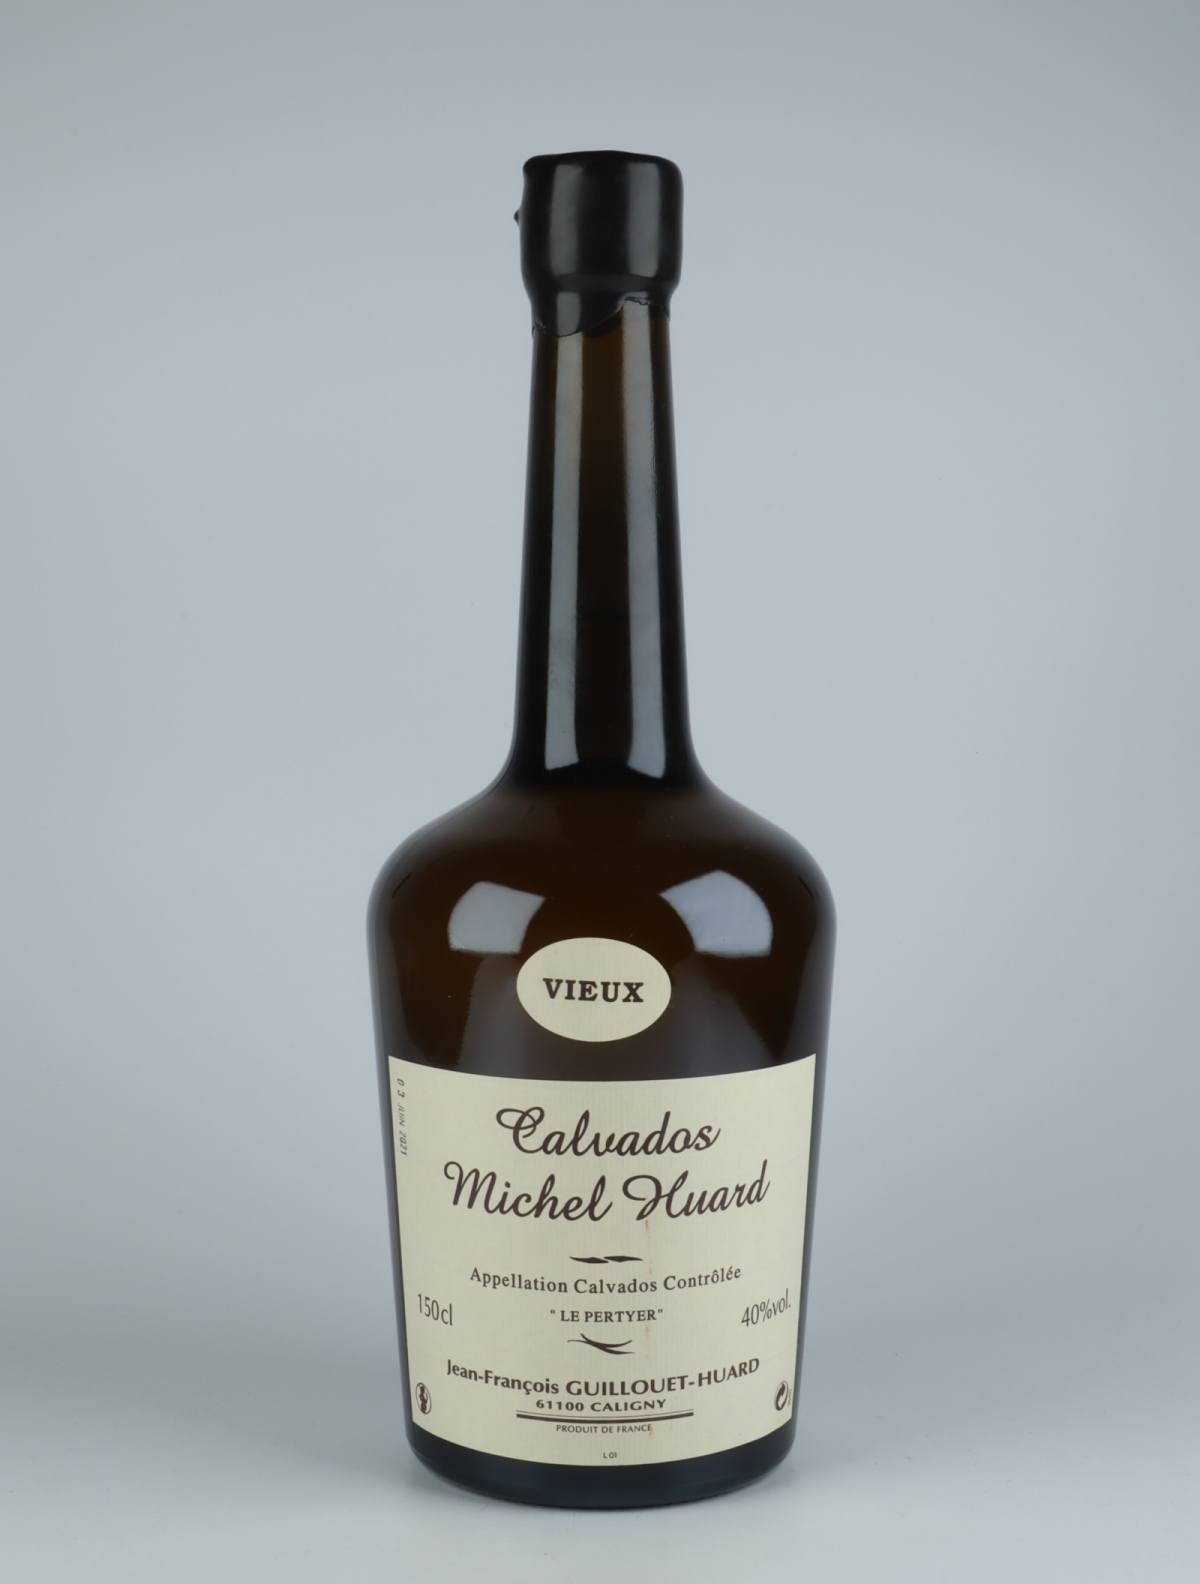 A bottle N.V. Vieux - Calvados Spirits from Michel Huard, Normandy in France